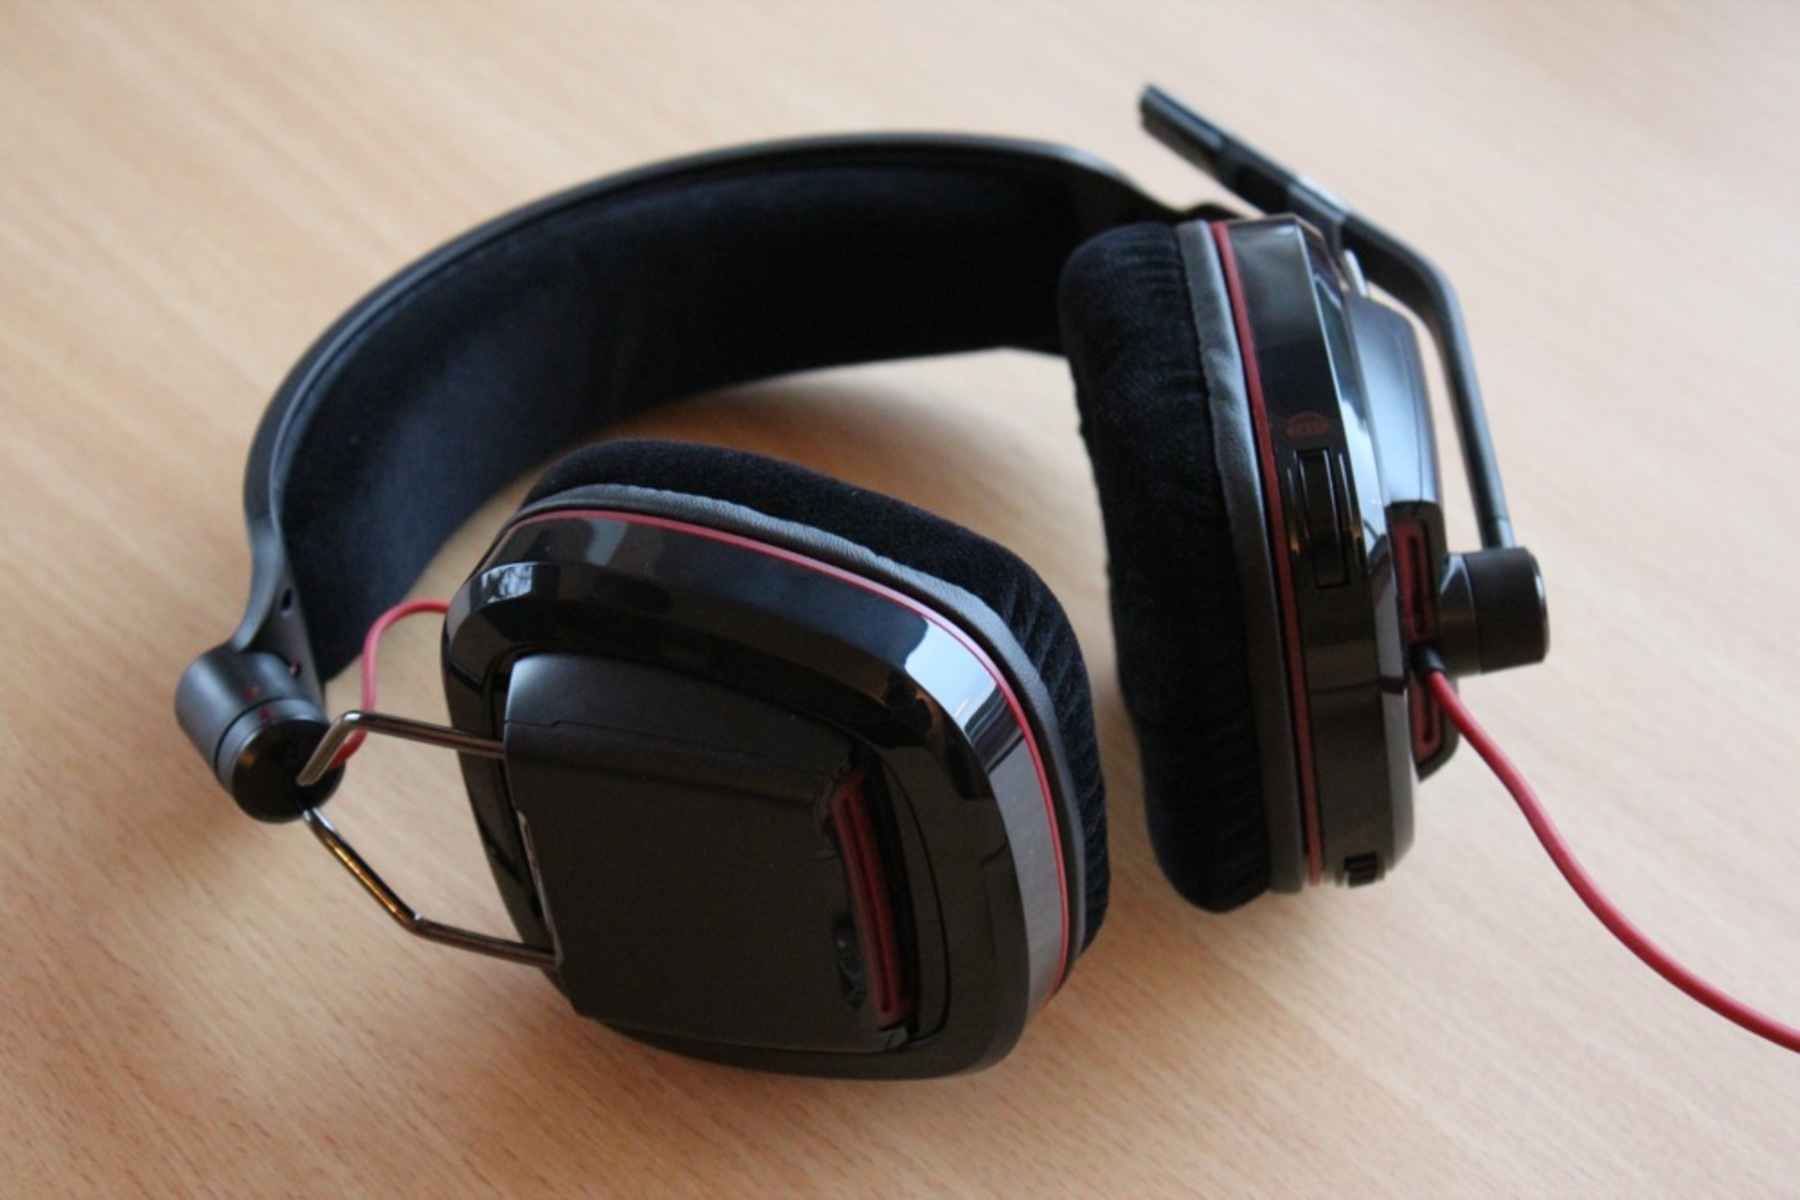 How To Obtain The CD For The Plantronics Gamecom 780 USB Gaming Headset